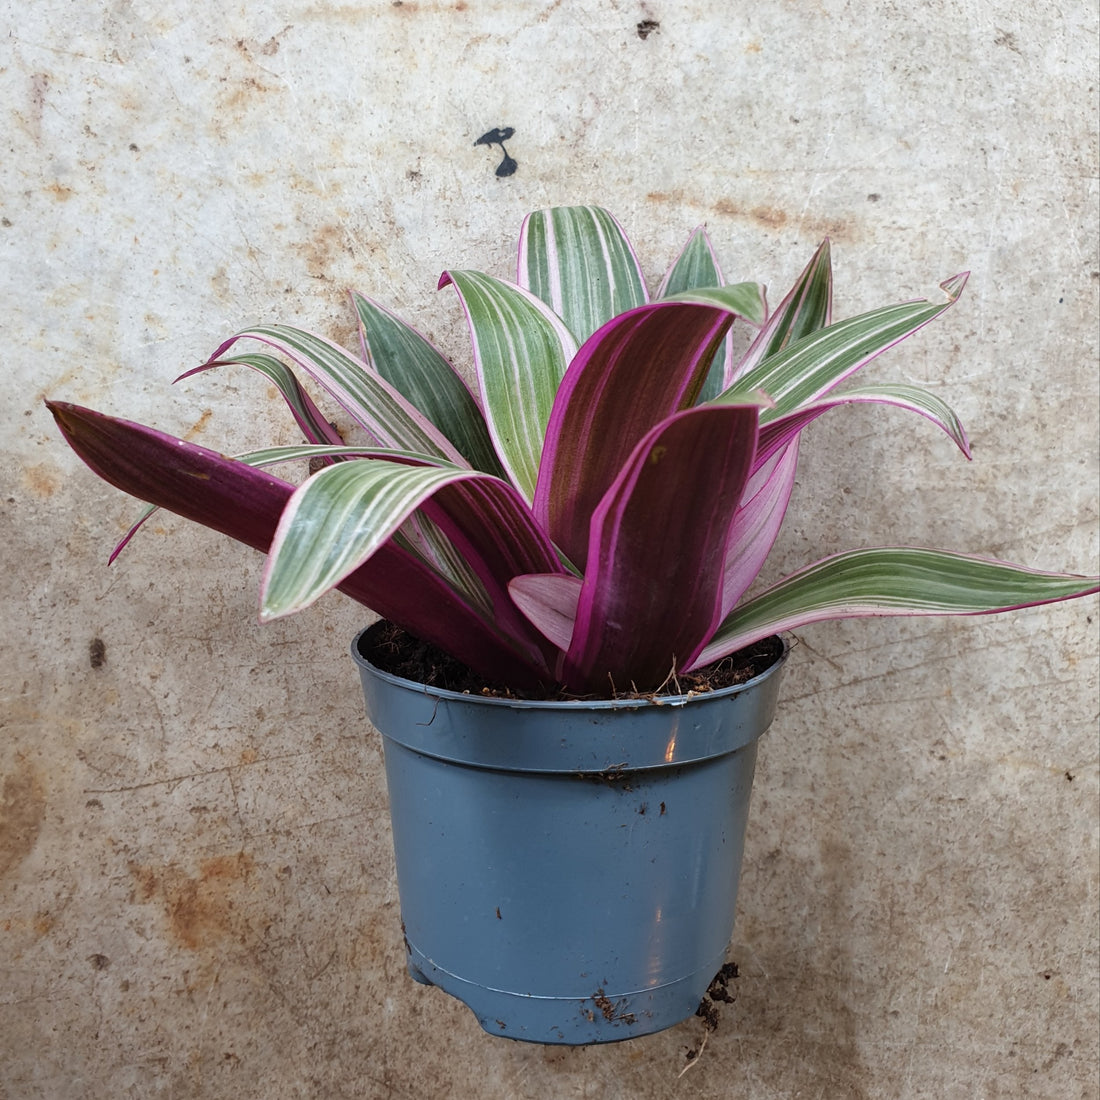 Tradescantia spathacea (Oyster plant/ Boat lily/ Moses in the cradle)